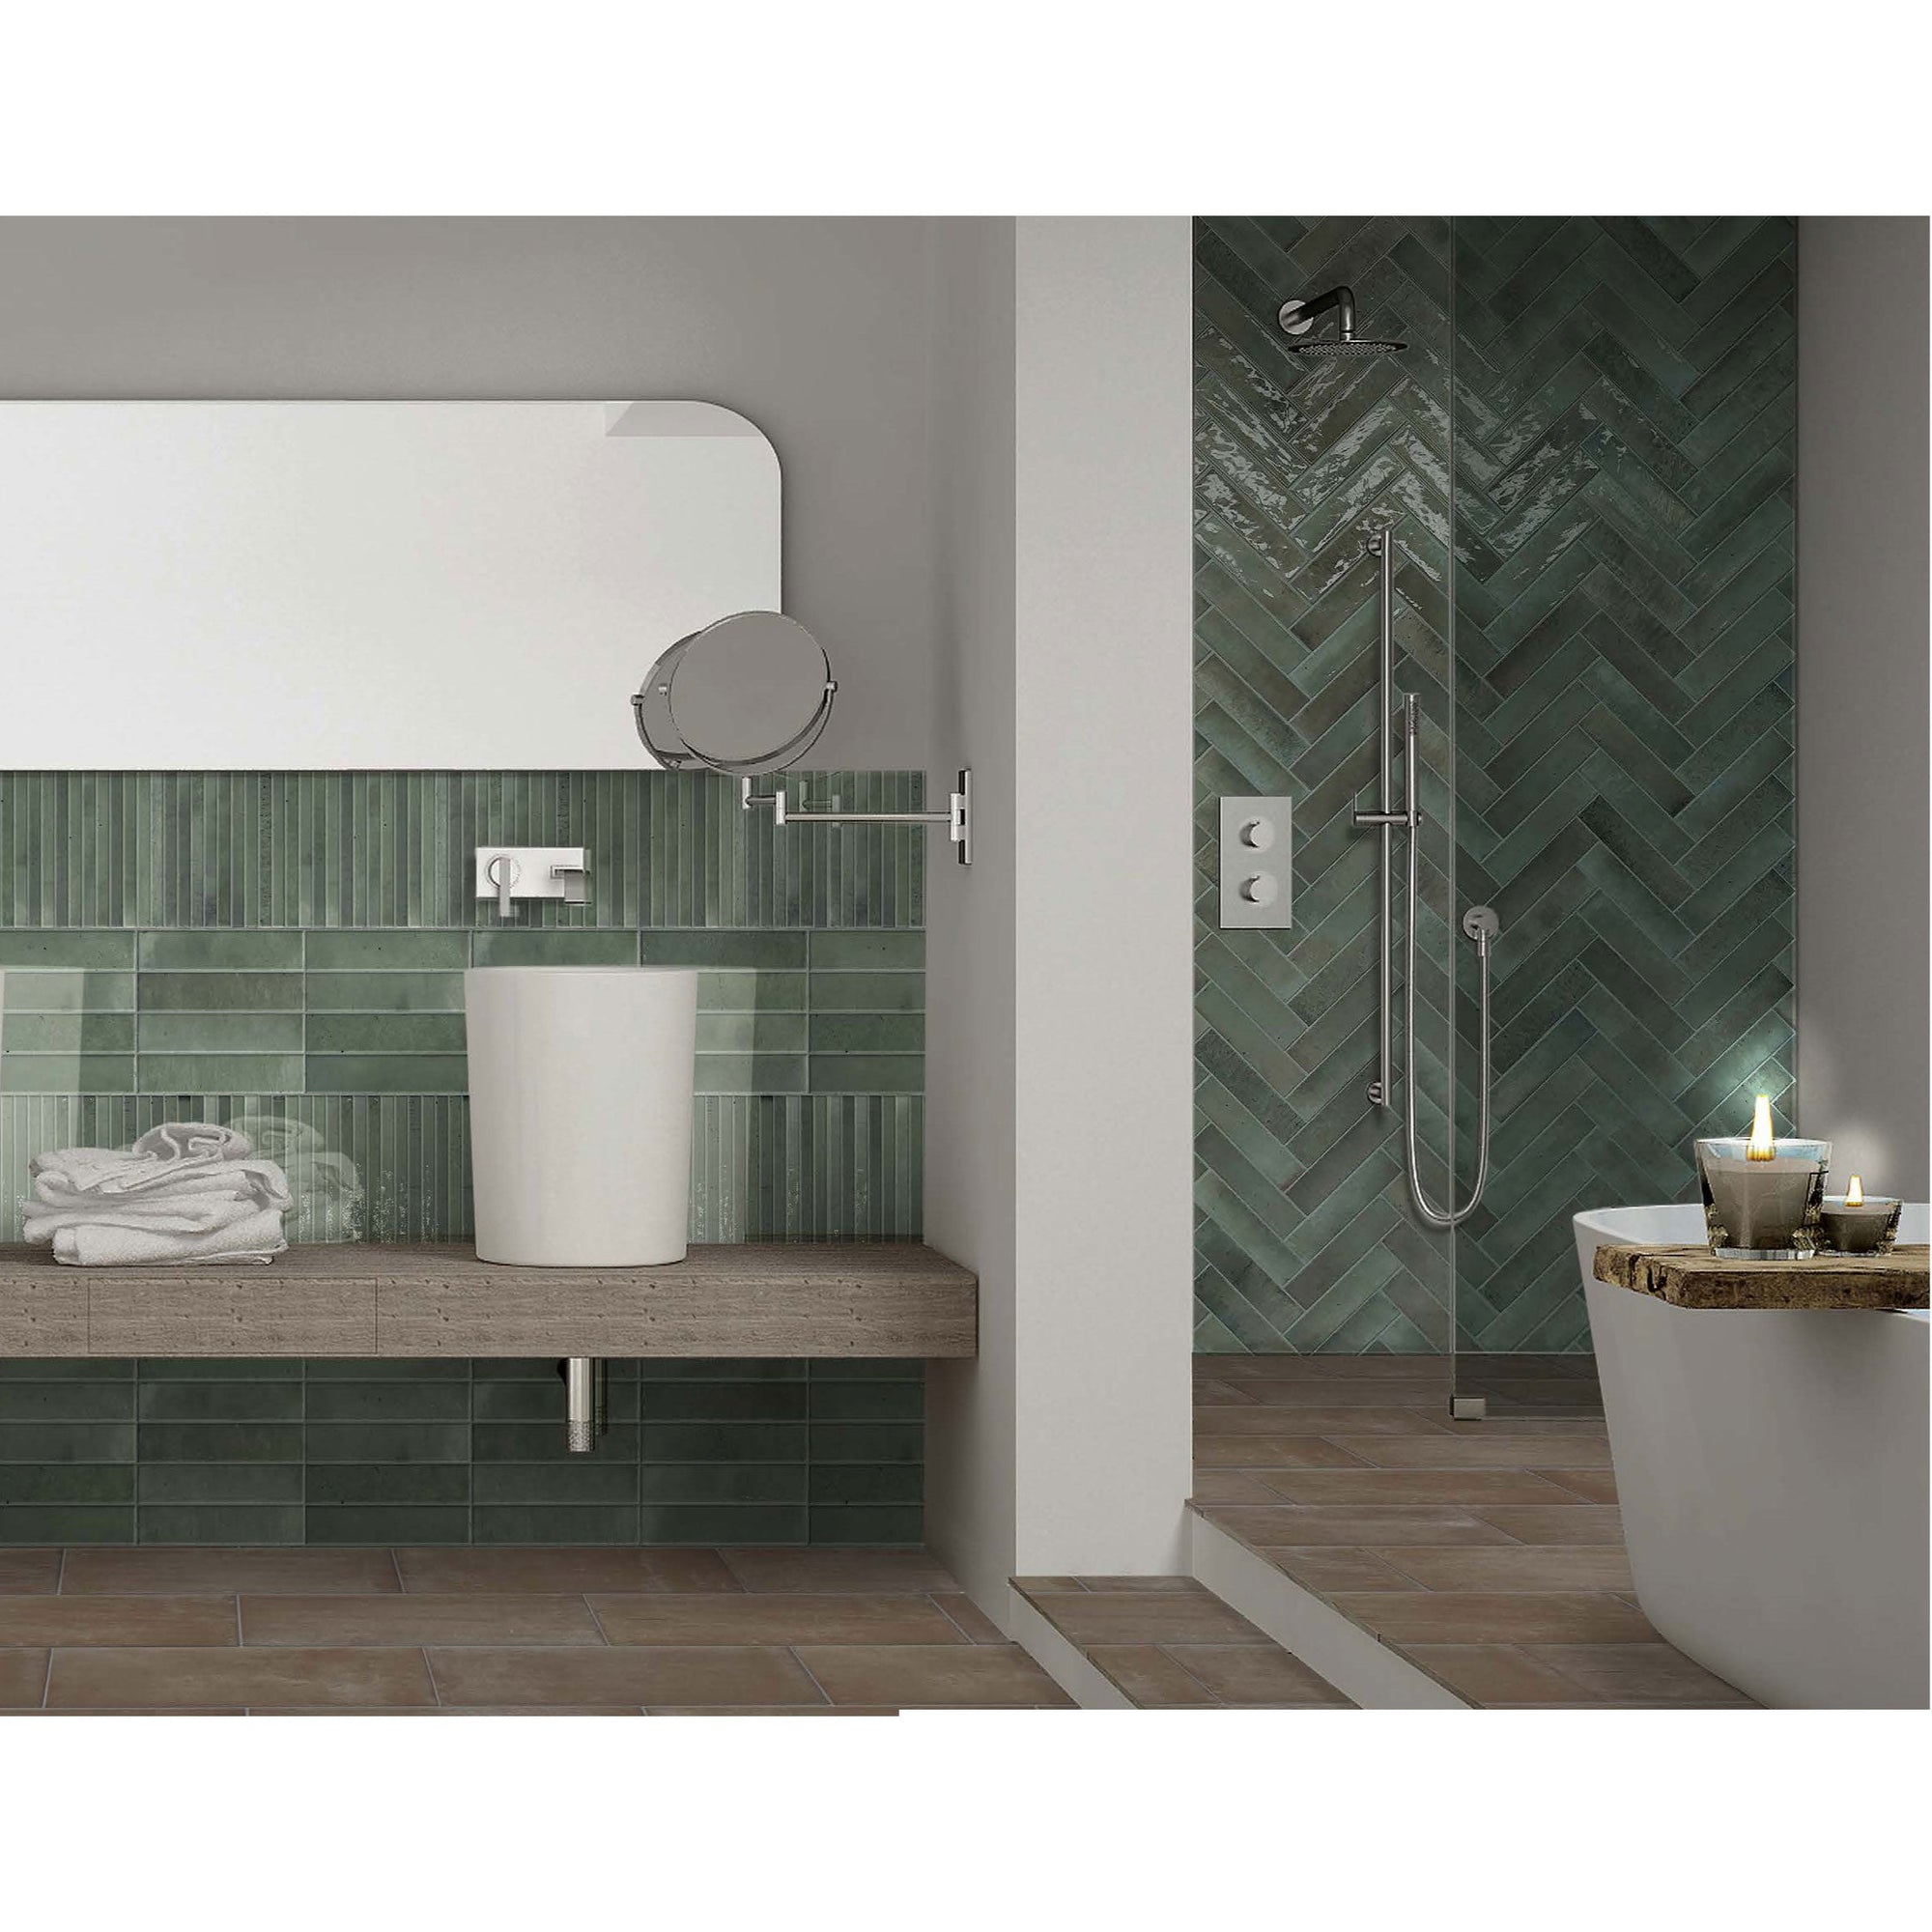 Cobsa - Homey Series 5 in. x 10 in. Porcelain Subway Tile - Forest